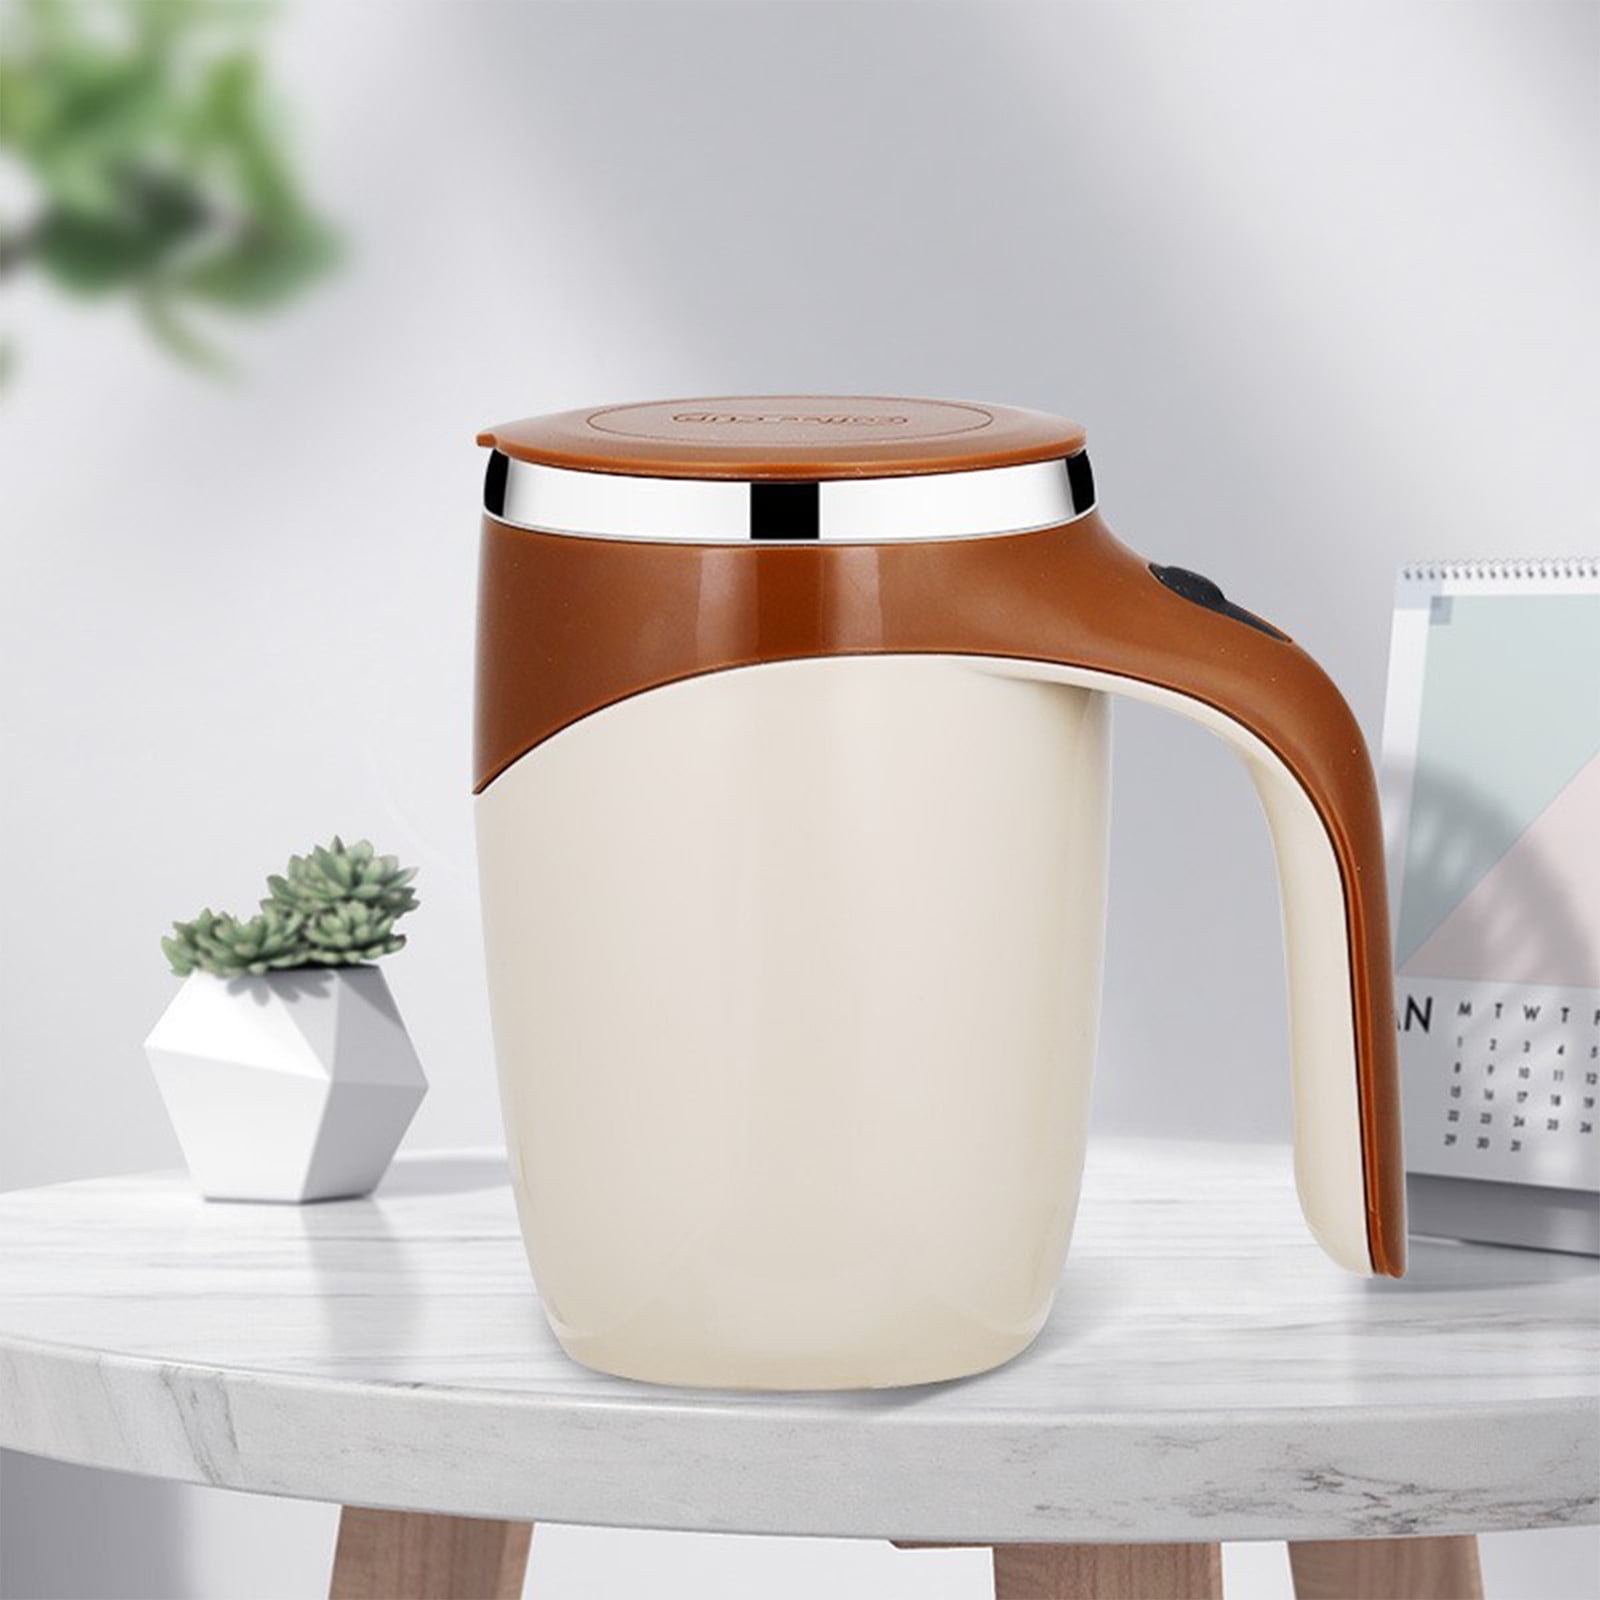 Jytue Self Stirring Mug, 380ml Self Mixing Coffee Cup Rechargeable Auto  Magnetic Coffee Mug with Stir Bar, Electric Stainless Steel Mixing Cup